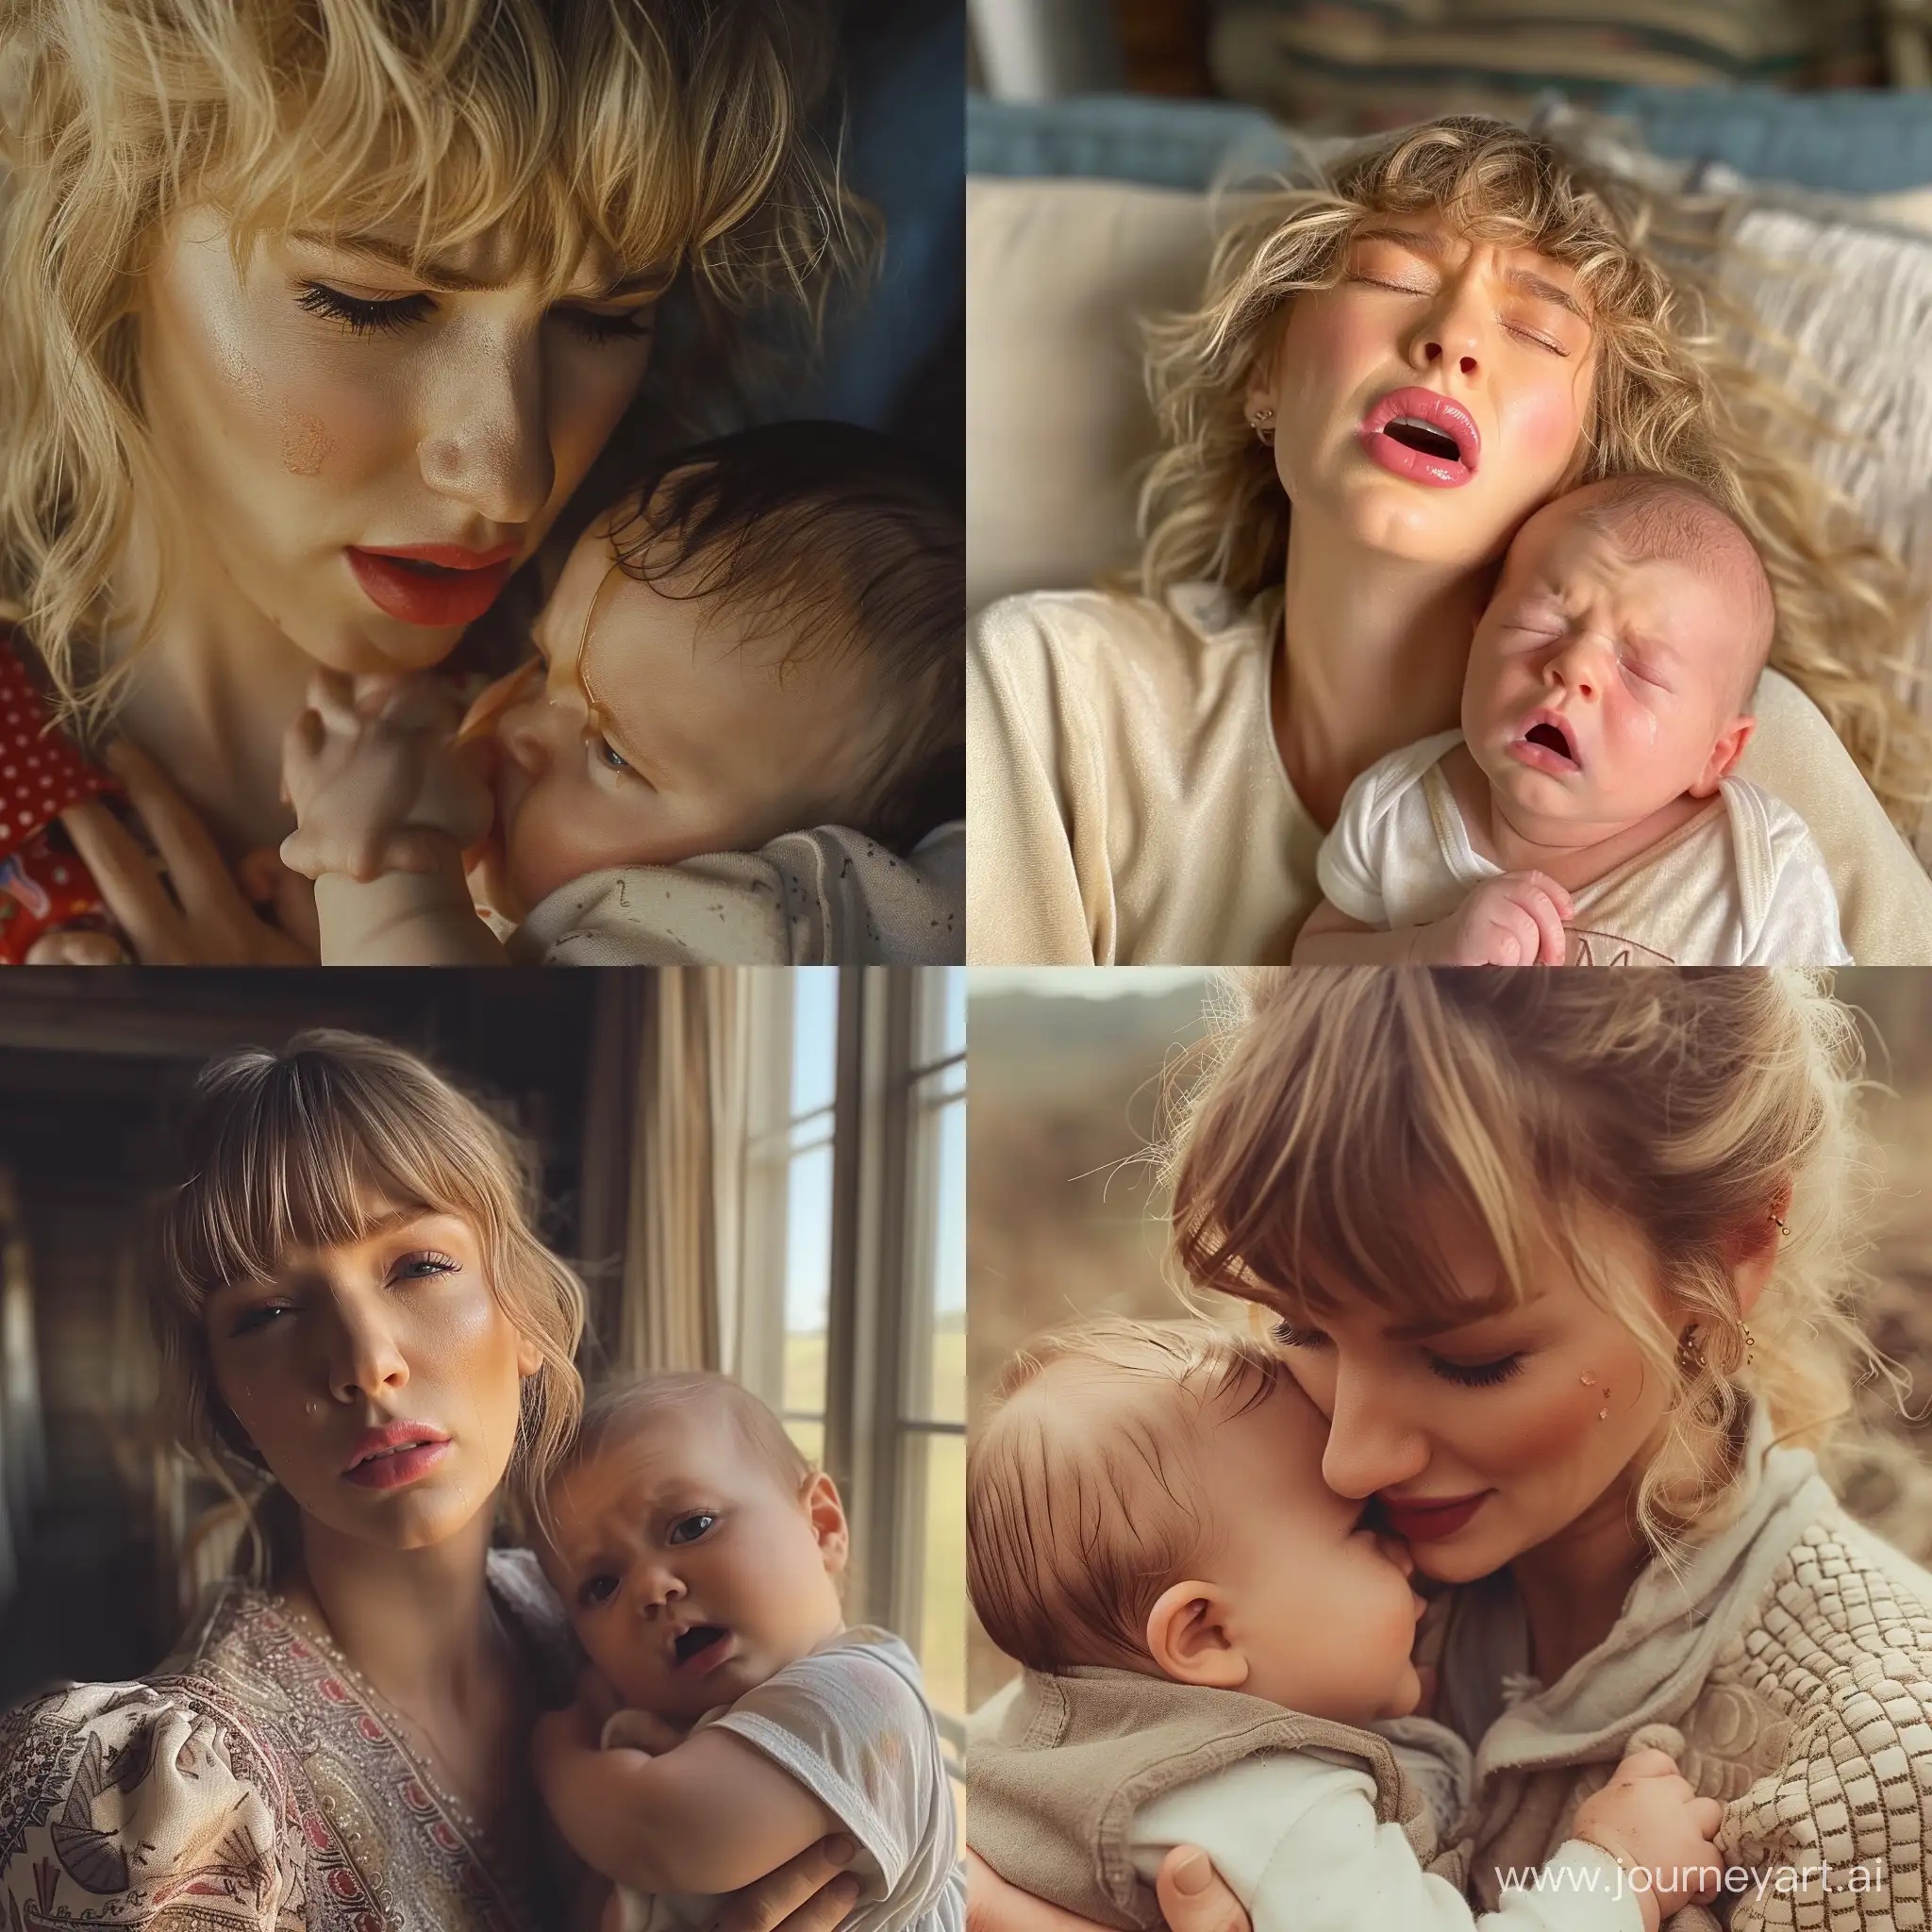 Tayler swift crying with a baby